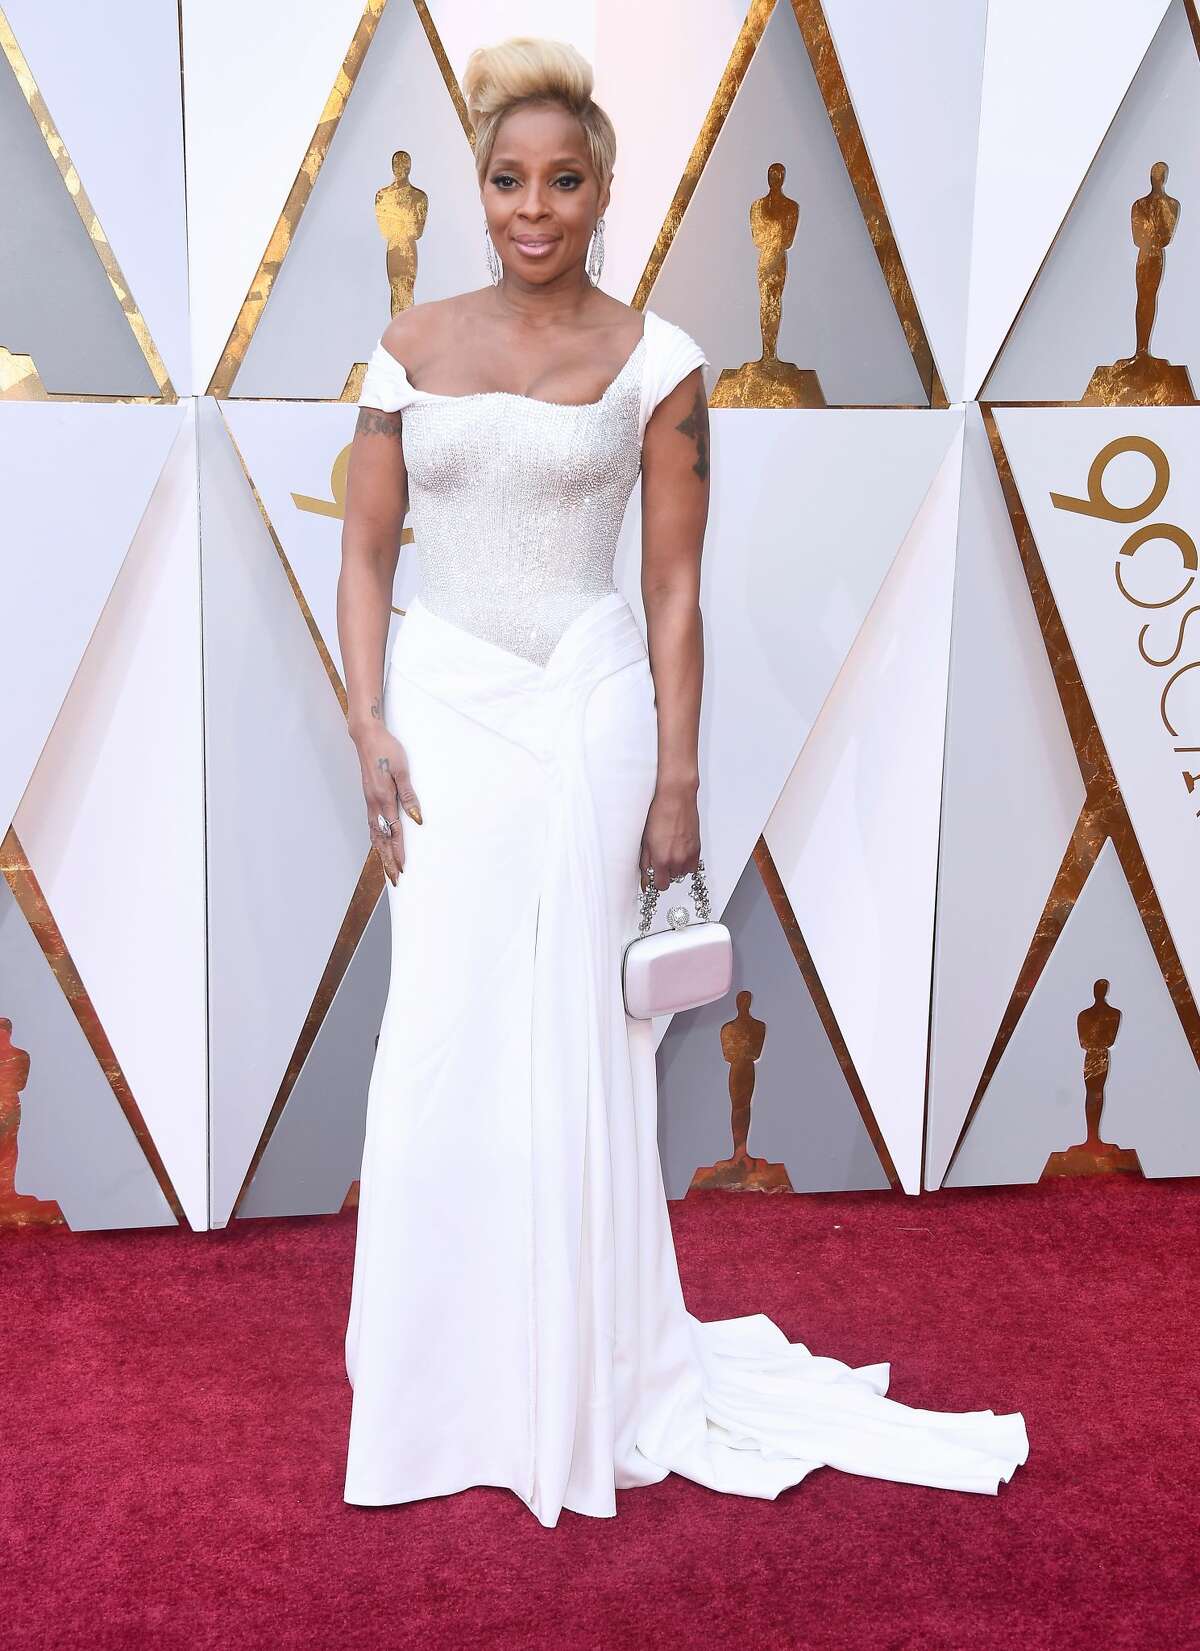 Best: Mary J. Blige, this is your best look to date!